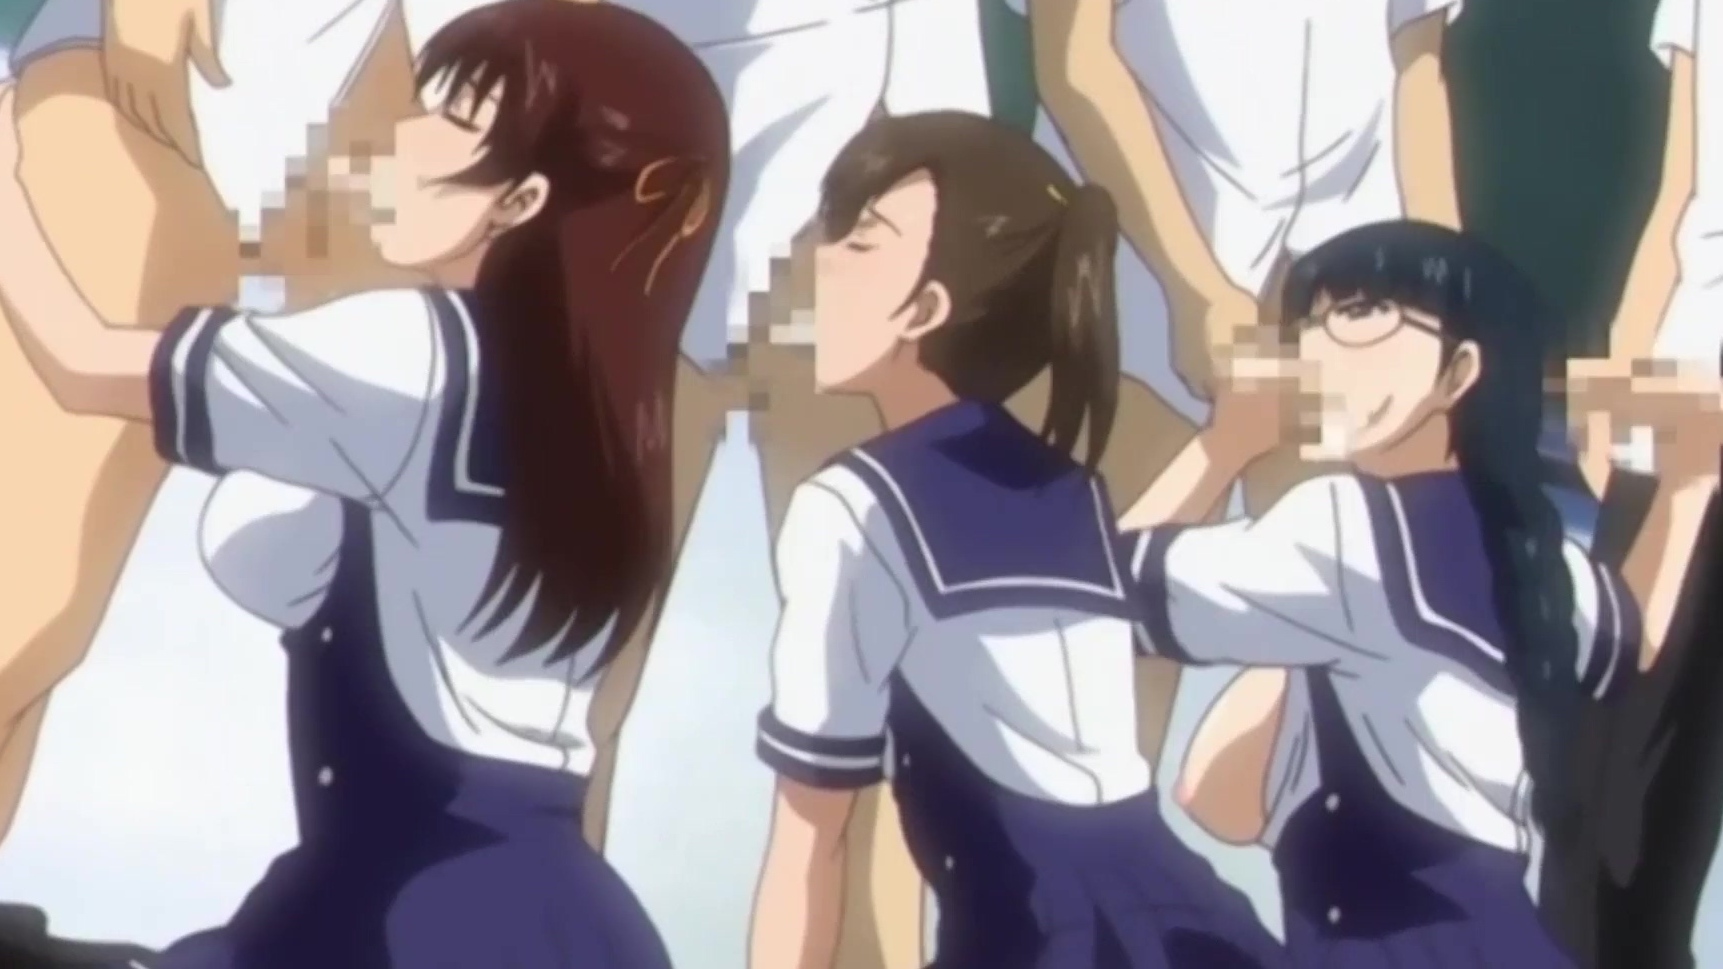 Group Fucking Hentai - Hentai school girls know how to please their cocky classmates